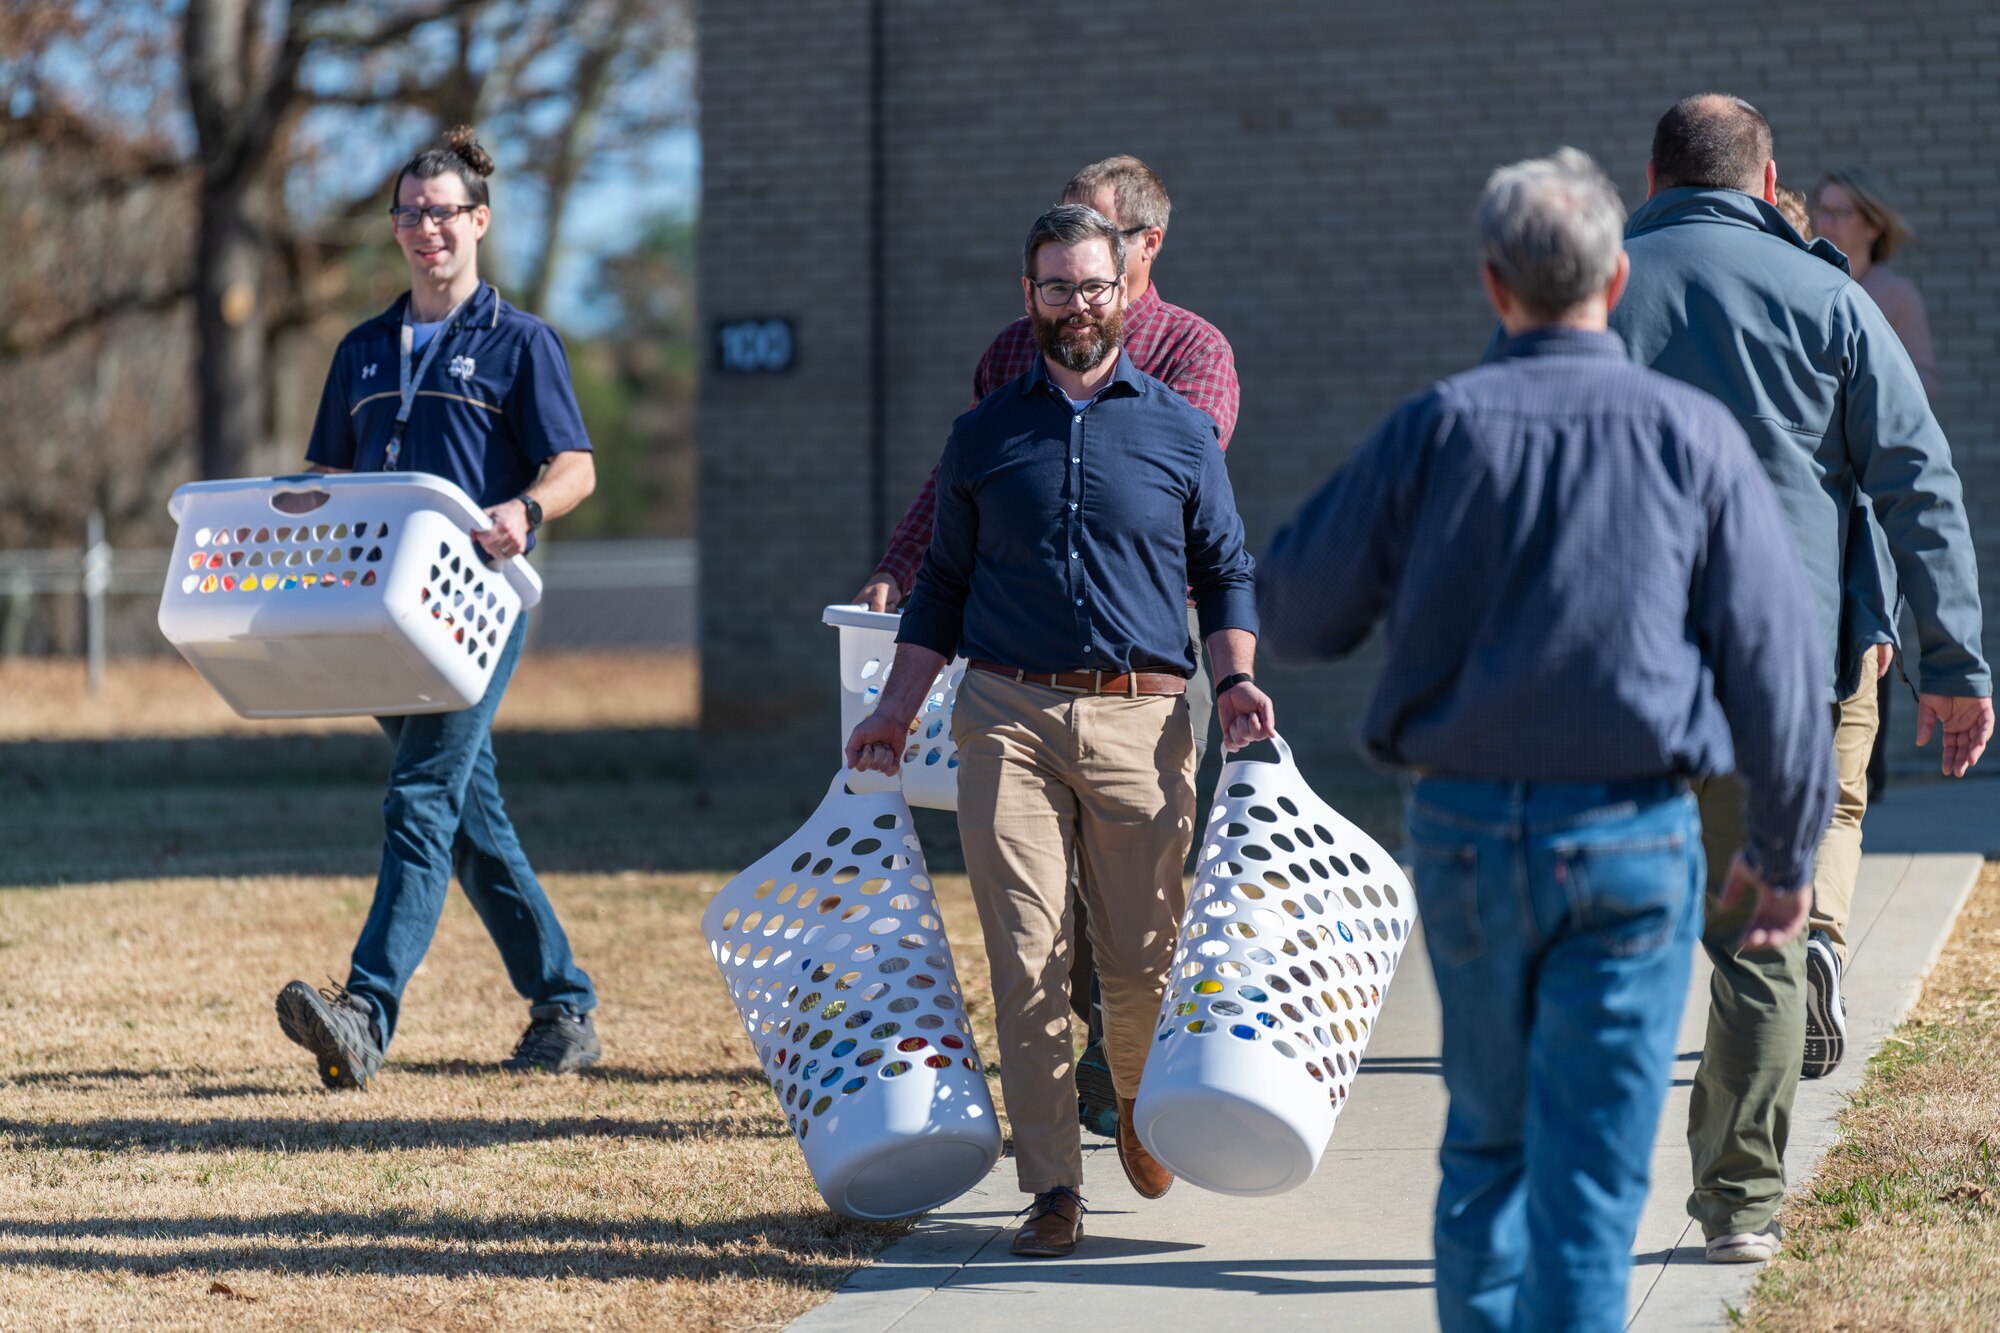 Arnold Air Force Base team members carry baskets assembled during the Arnold AFB Junior Force Council Thanksgiving Food Basket Drive to load for distribution Nov. 16, 2023, at Arnold Air Force Base, Tenn. The drive took place over a week in November. During the effort, Arnold AFB team members donated nonperishable food items to be used for the baskets. This year, 57 baskets were provided for Coffee County families in need of food to prepare Thanksgiving meals. Team members pictured include Adam Moon, center, and Joseph Bedell, left. (U.S. Air Force photo by Keith Thornburgh)